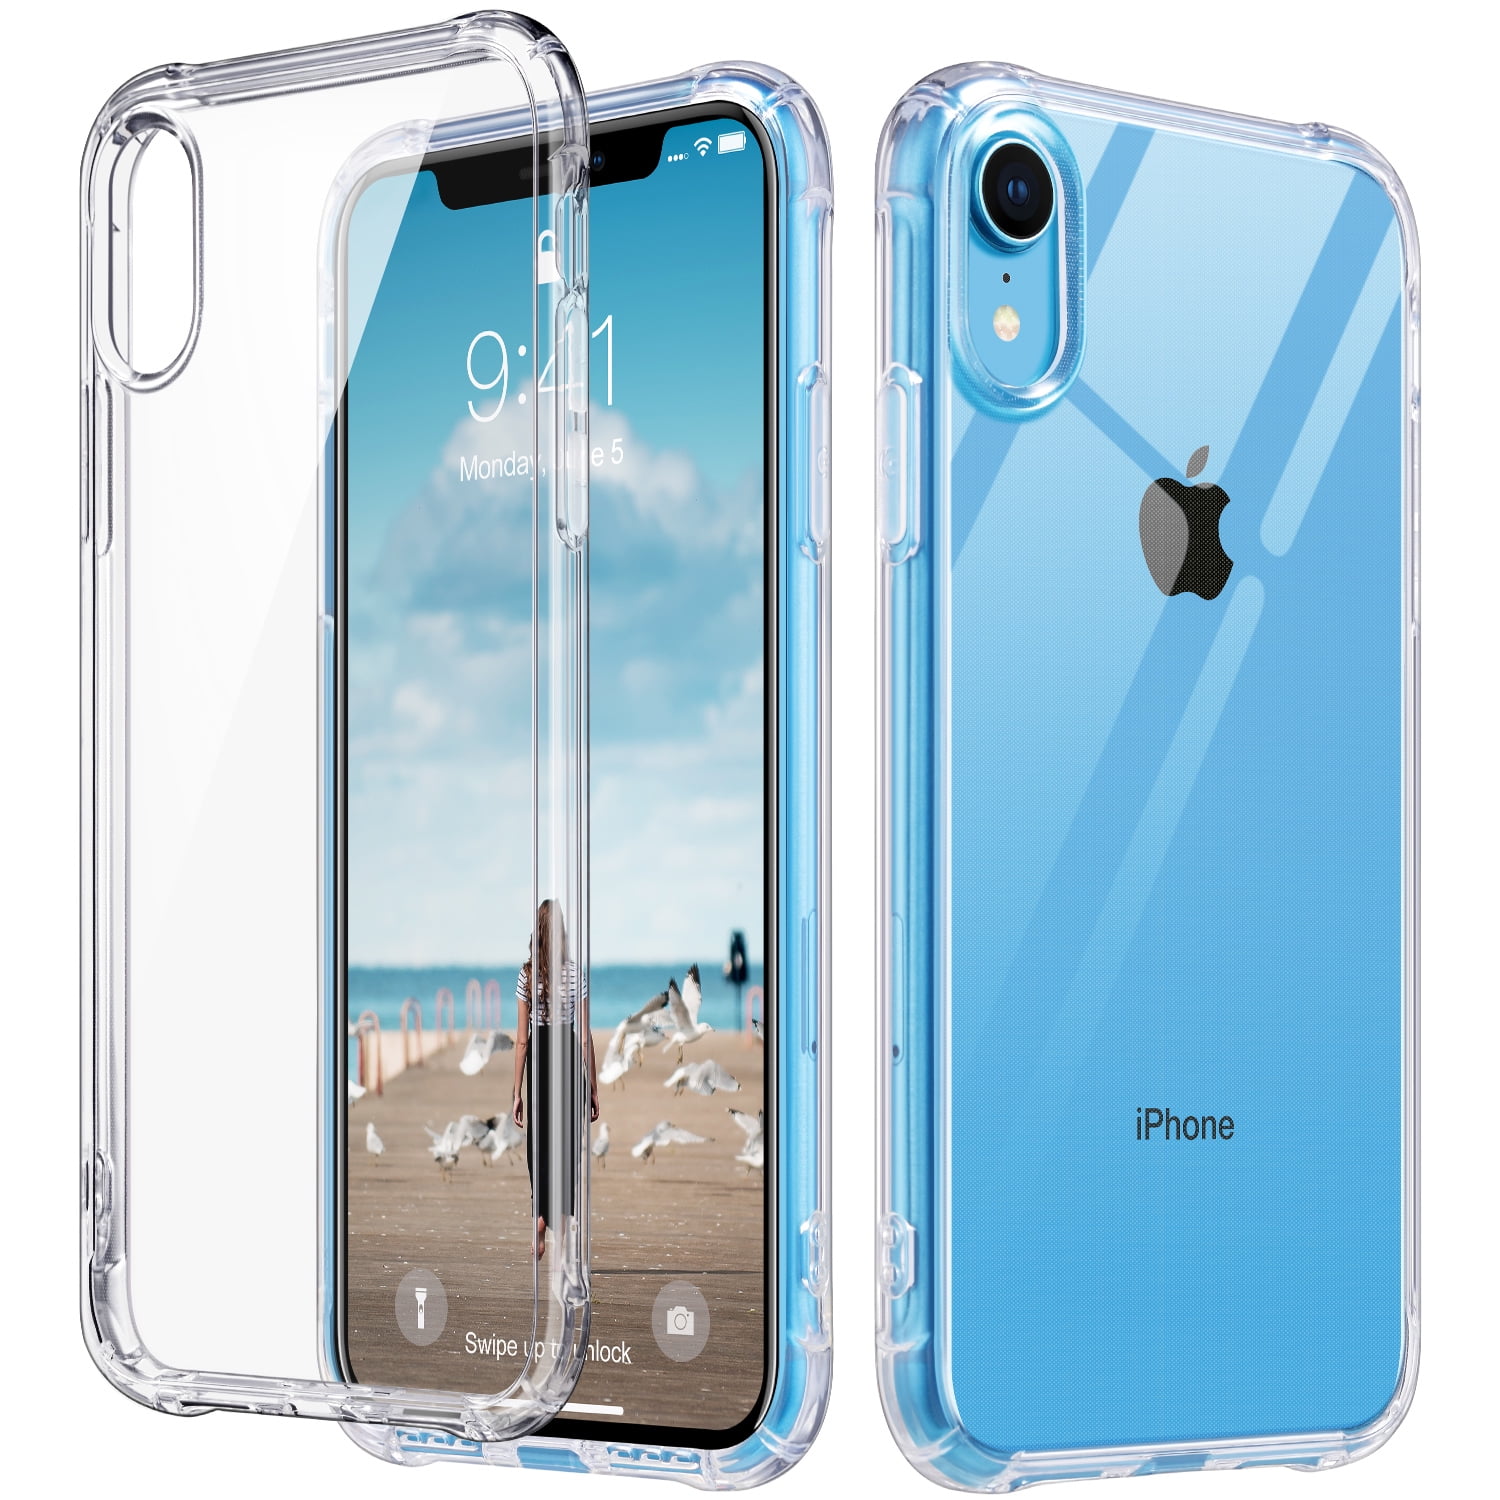 FUJICAR iPhone XR Case for Girls,Glossy Smooth Slim Fit Clear Bumper Shock Proof Flexible Soft TPU Full Body Protective Cover Case with 360 Degree Rotating Ring for iPhone XR 2018 6.1 inch 